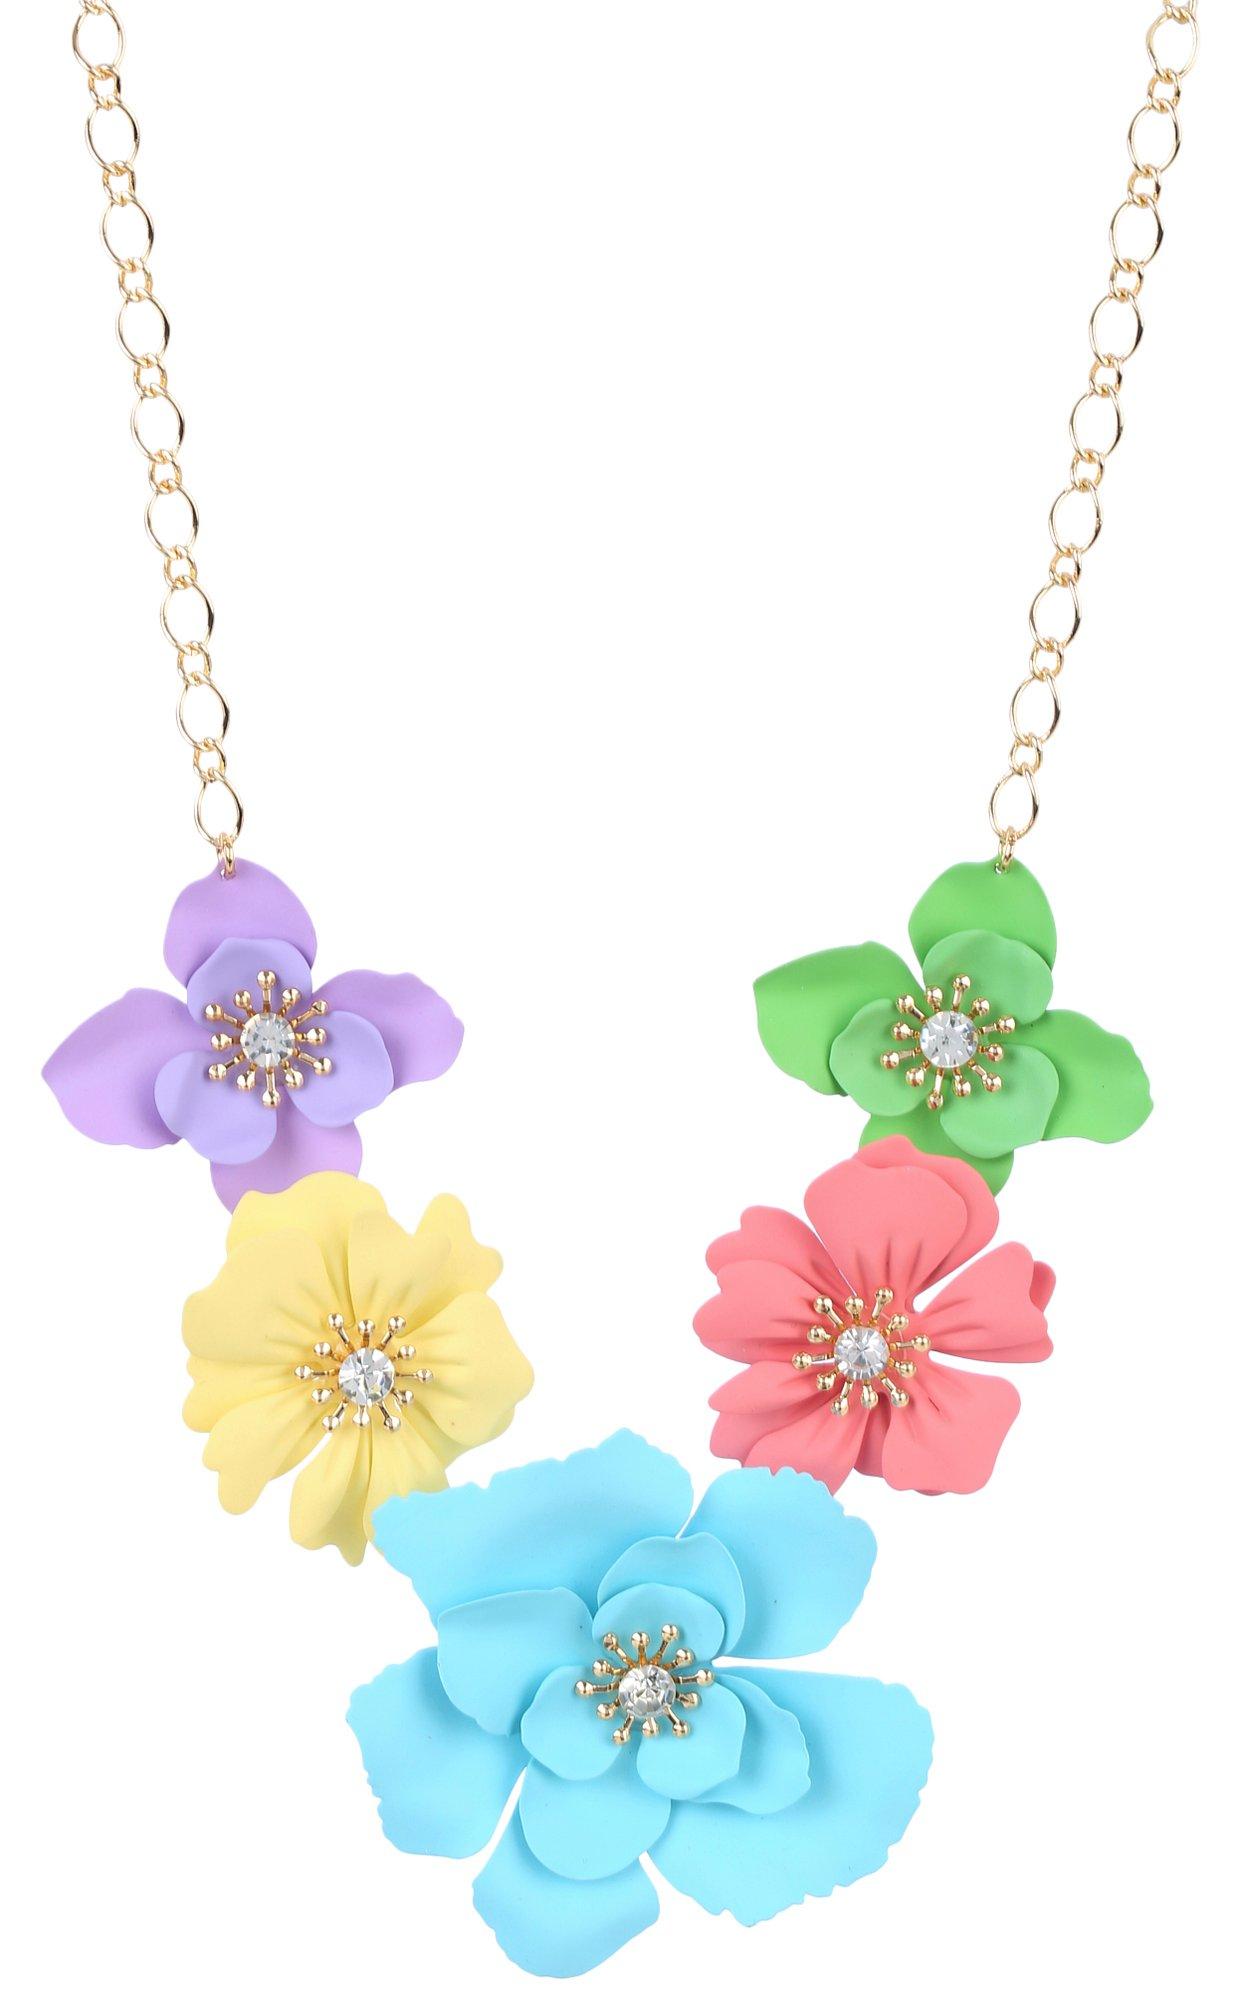 Bay Studio 16 In. Crystal Flower Frontal Chain Necklace